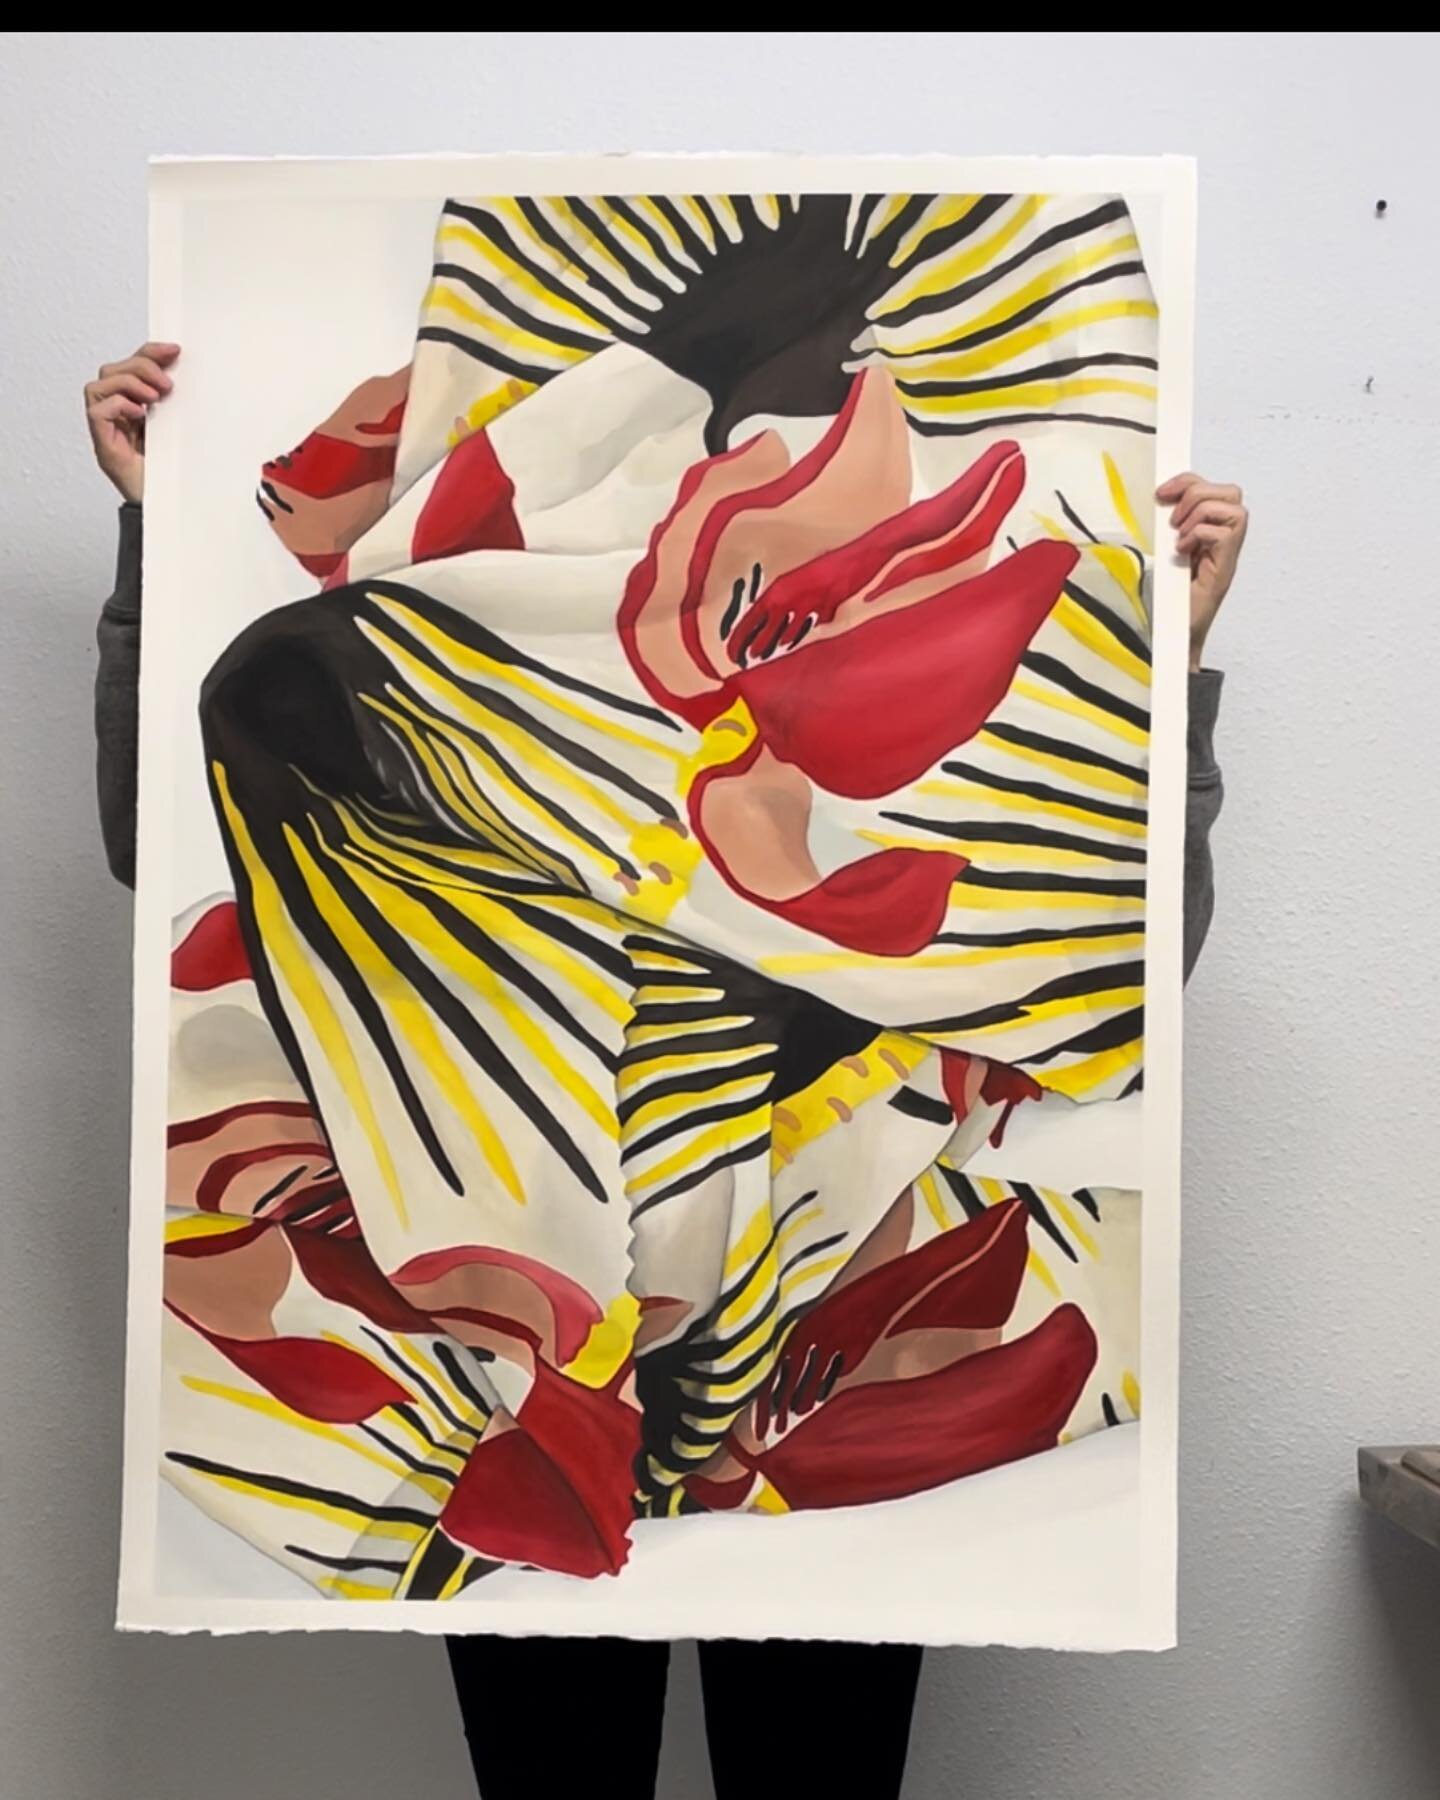 My most recent painting. I&rsquo;m there for scale. 
Untitled (for now)
Watercolor on paper 
40 x 29 inches 
2022